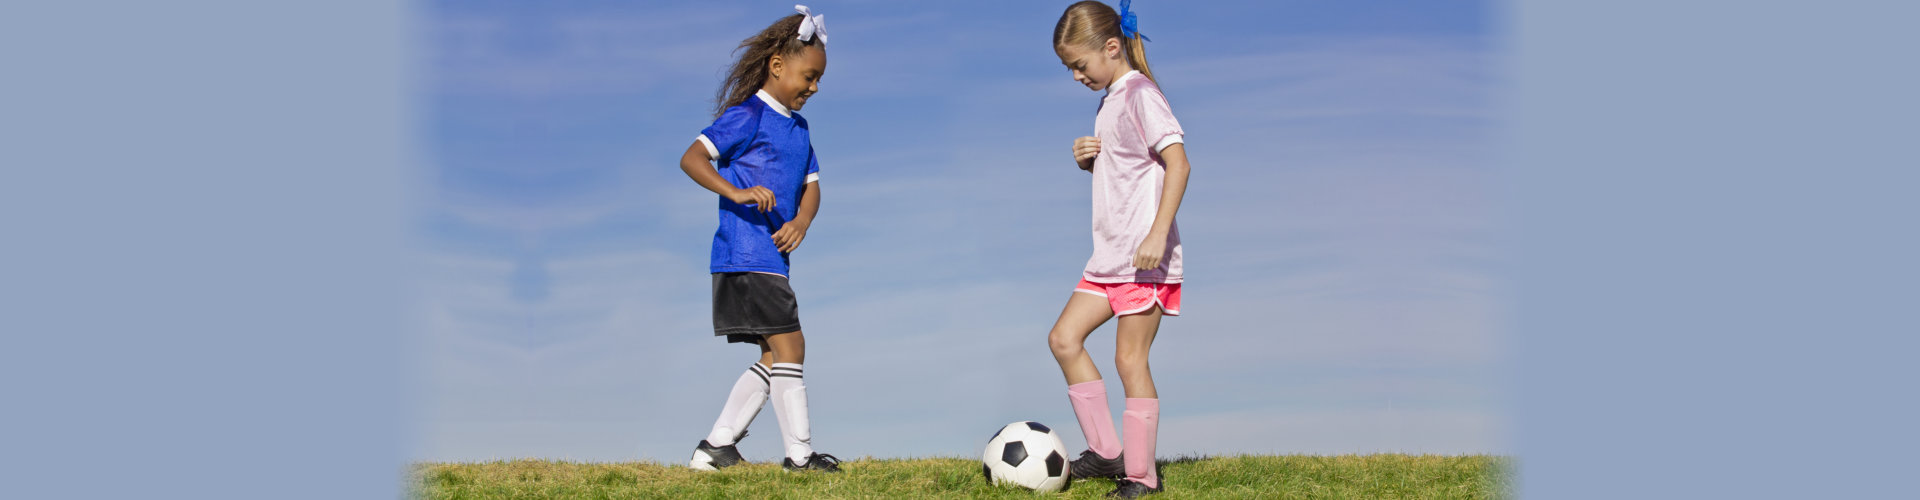 Two young girls on youth soccer teams playing against each other